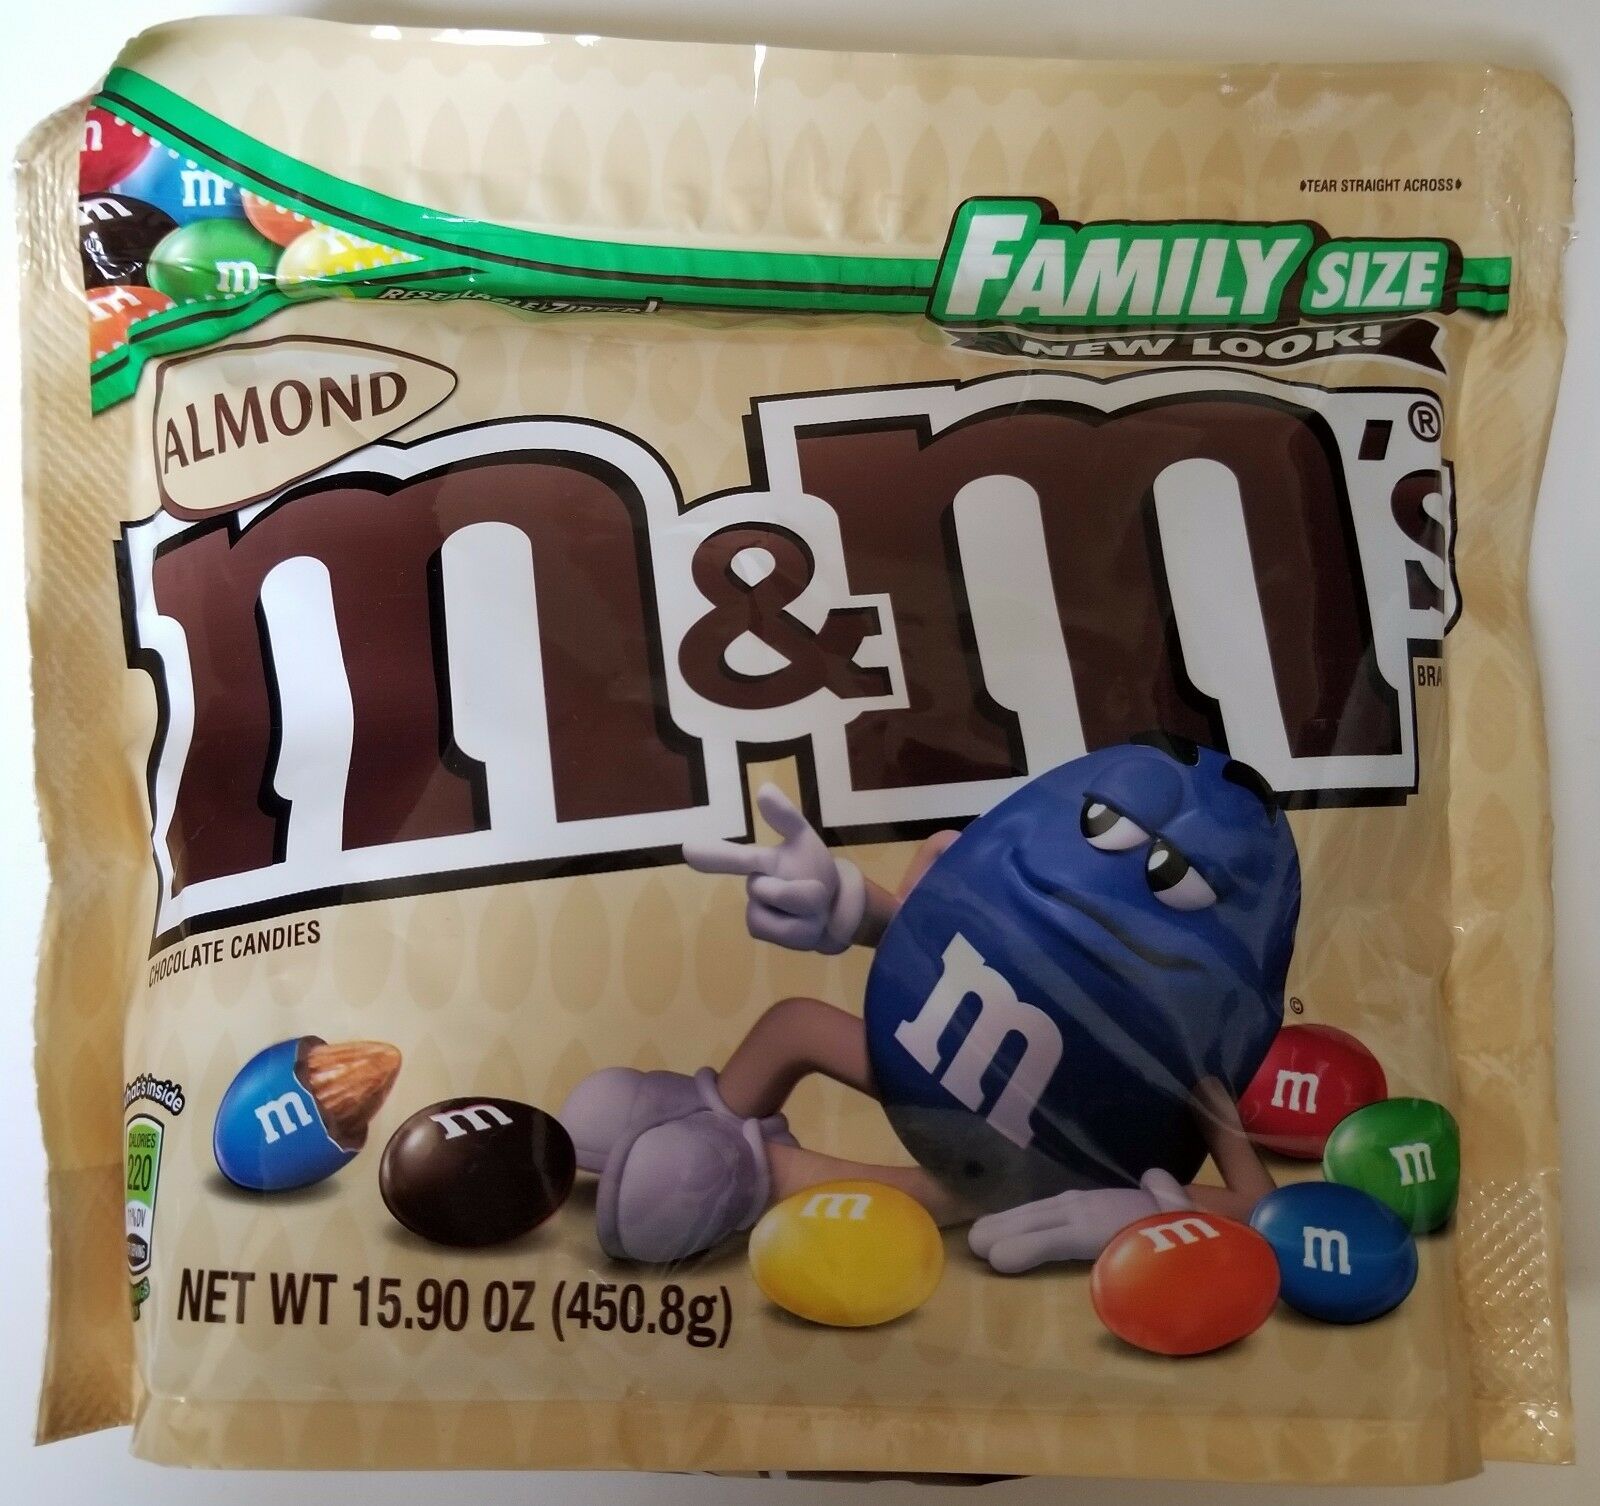 New Sealed Almond M&m's Family Size 15.90 Oz Bag Free Worldwide Shipping